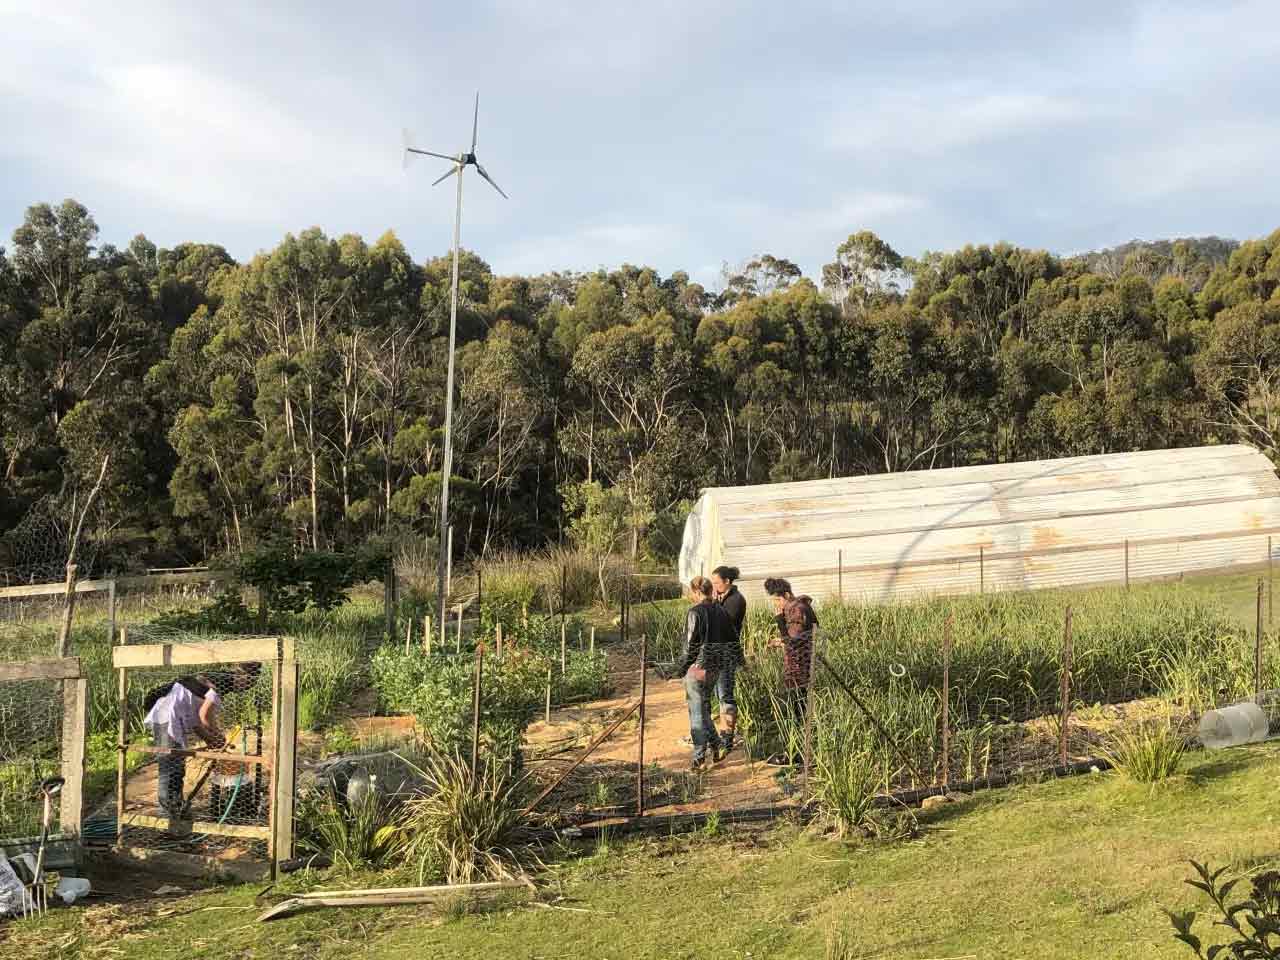 This Aussie shack is a forager’s paradise